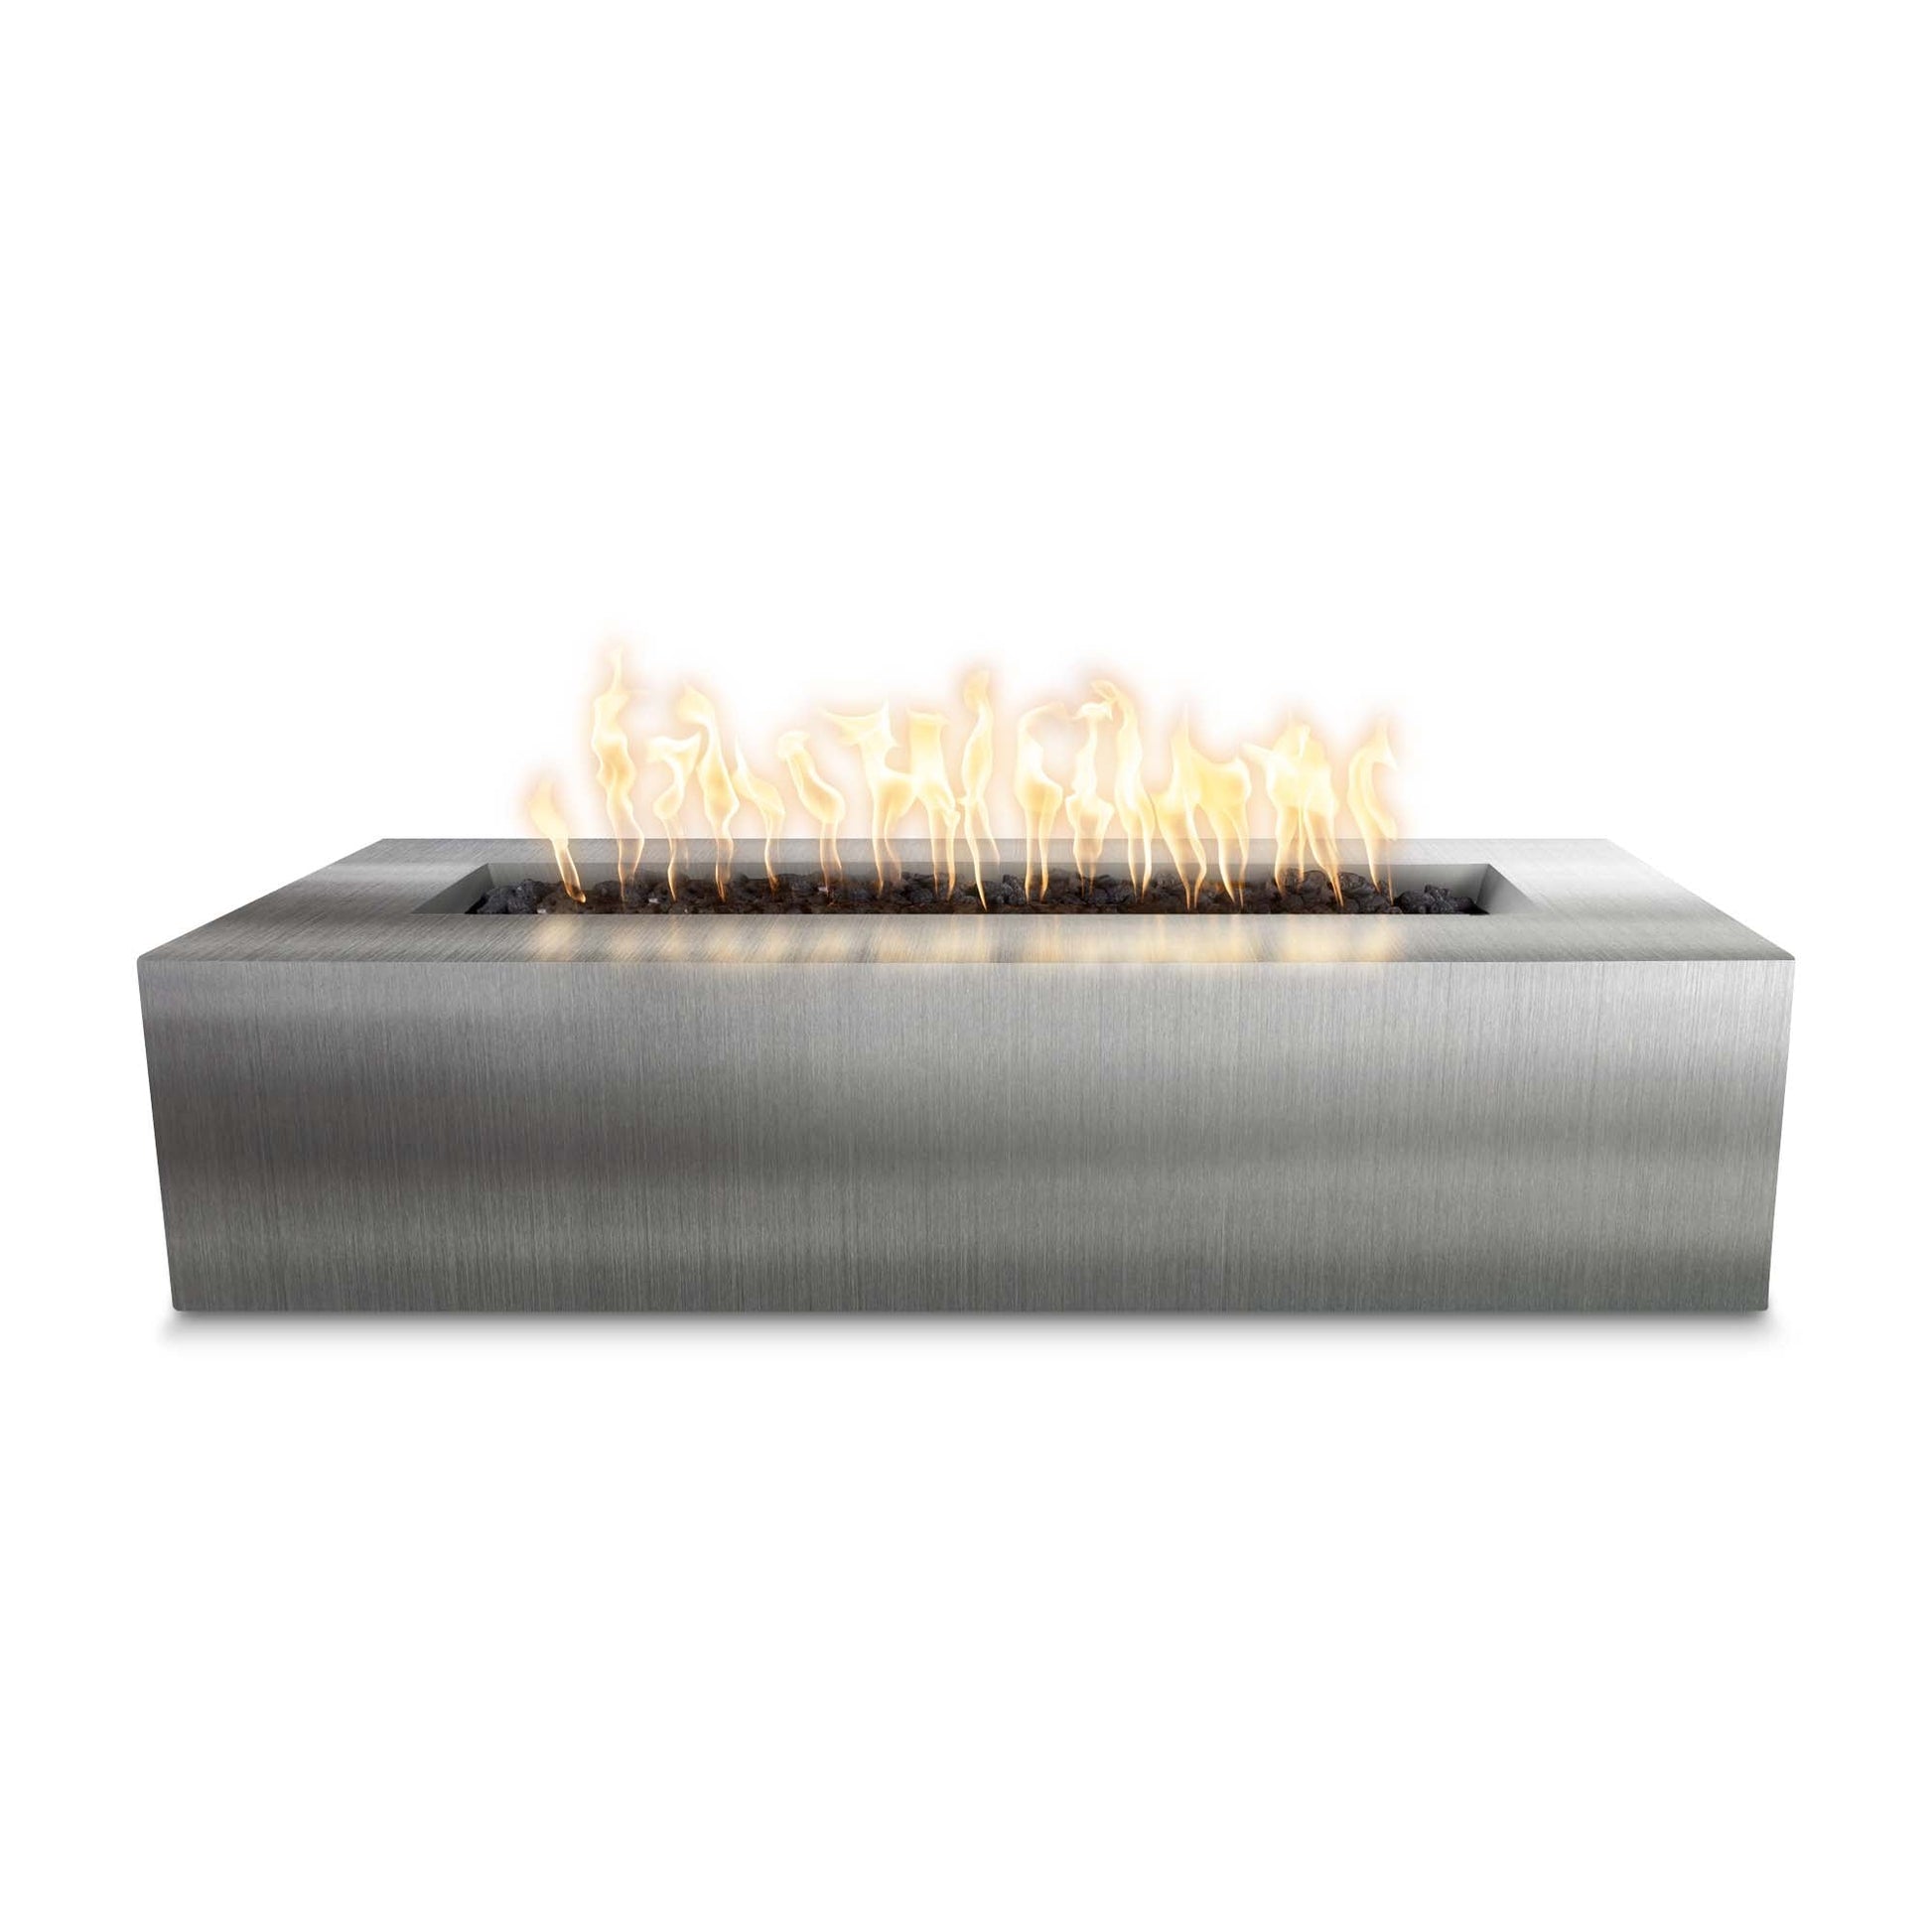 The Outdoor Plus Rectangular Regal 60" Stainless Steel Natural Gas Fire Pit with Match Lit Ignition